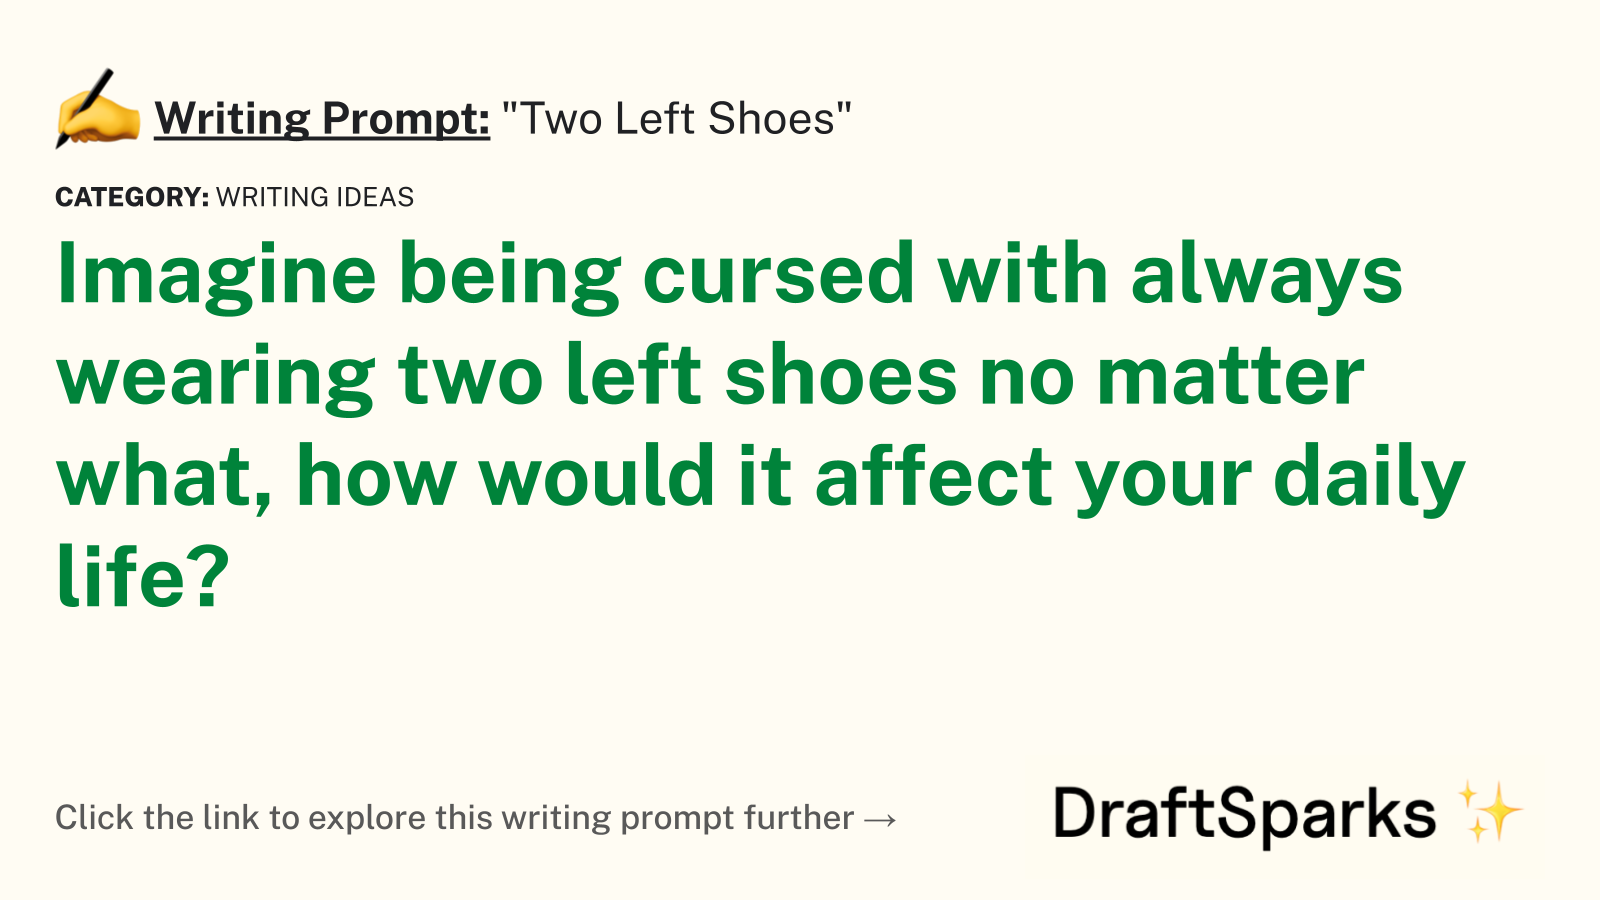 “Two Left Shoes”